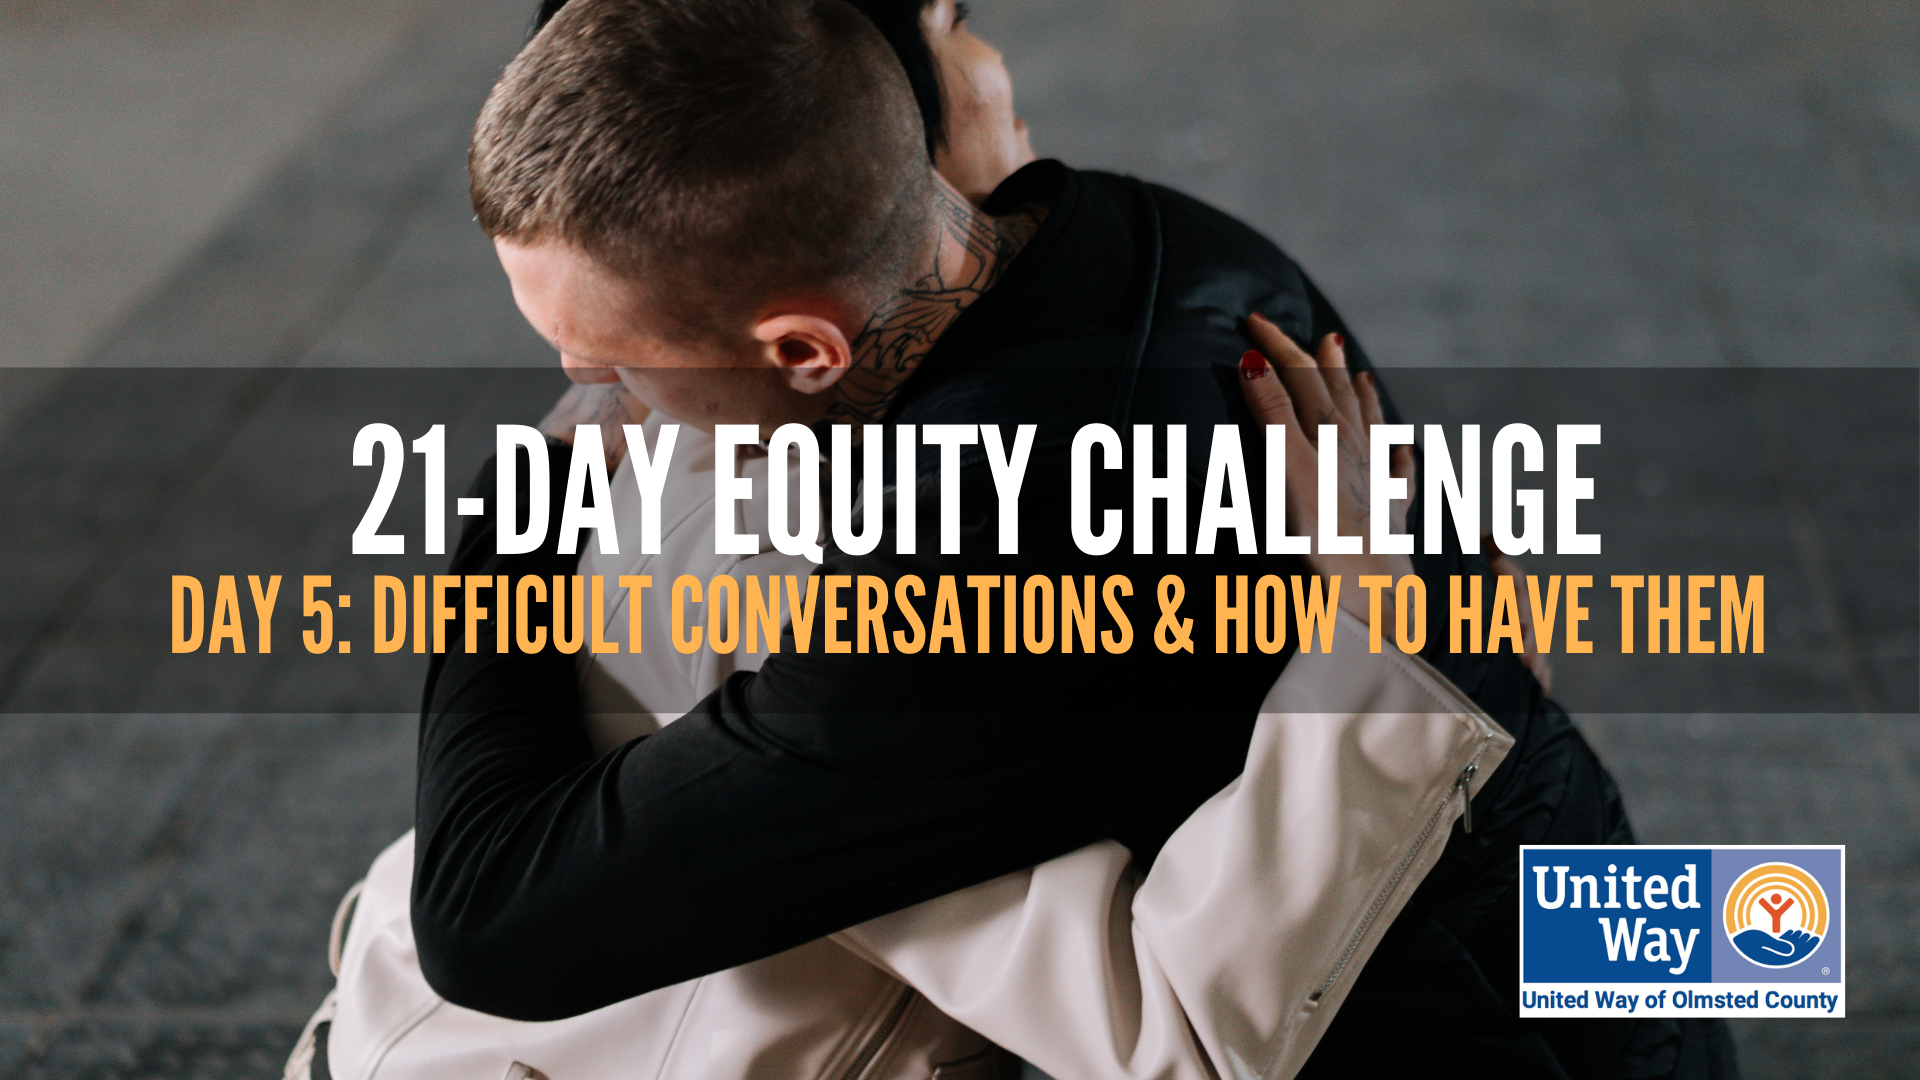 Day 5: Difficult Conversations and How to Have Them